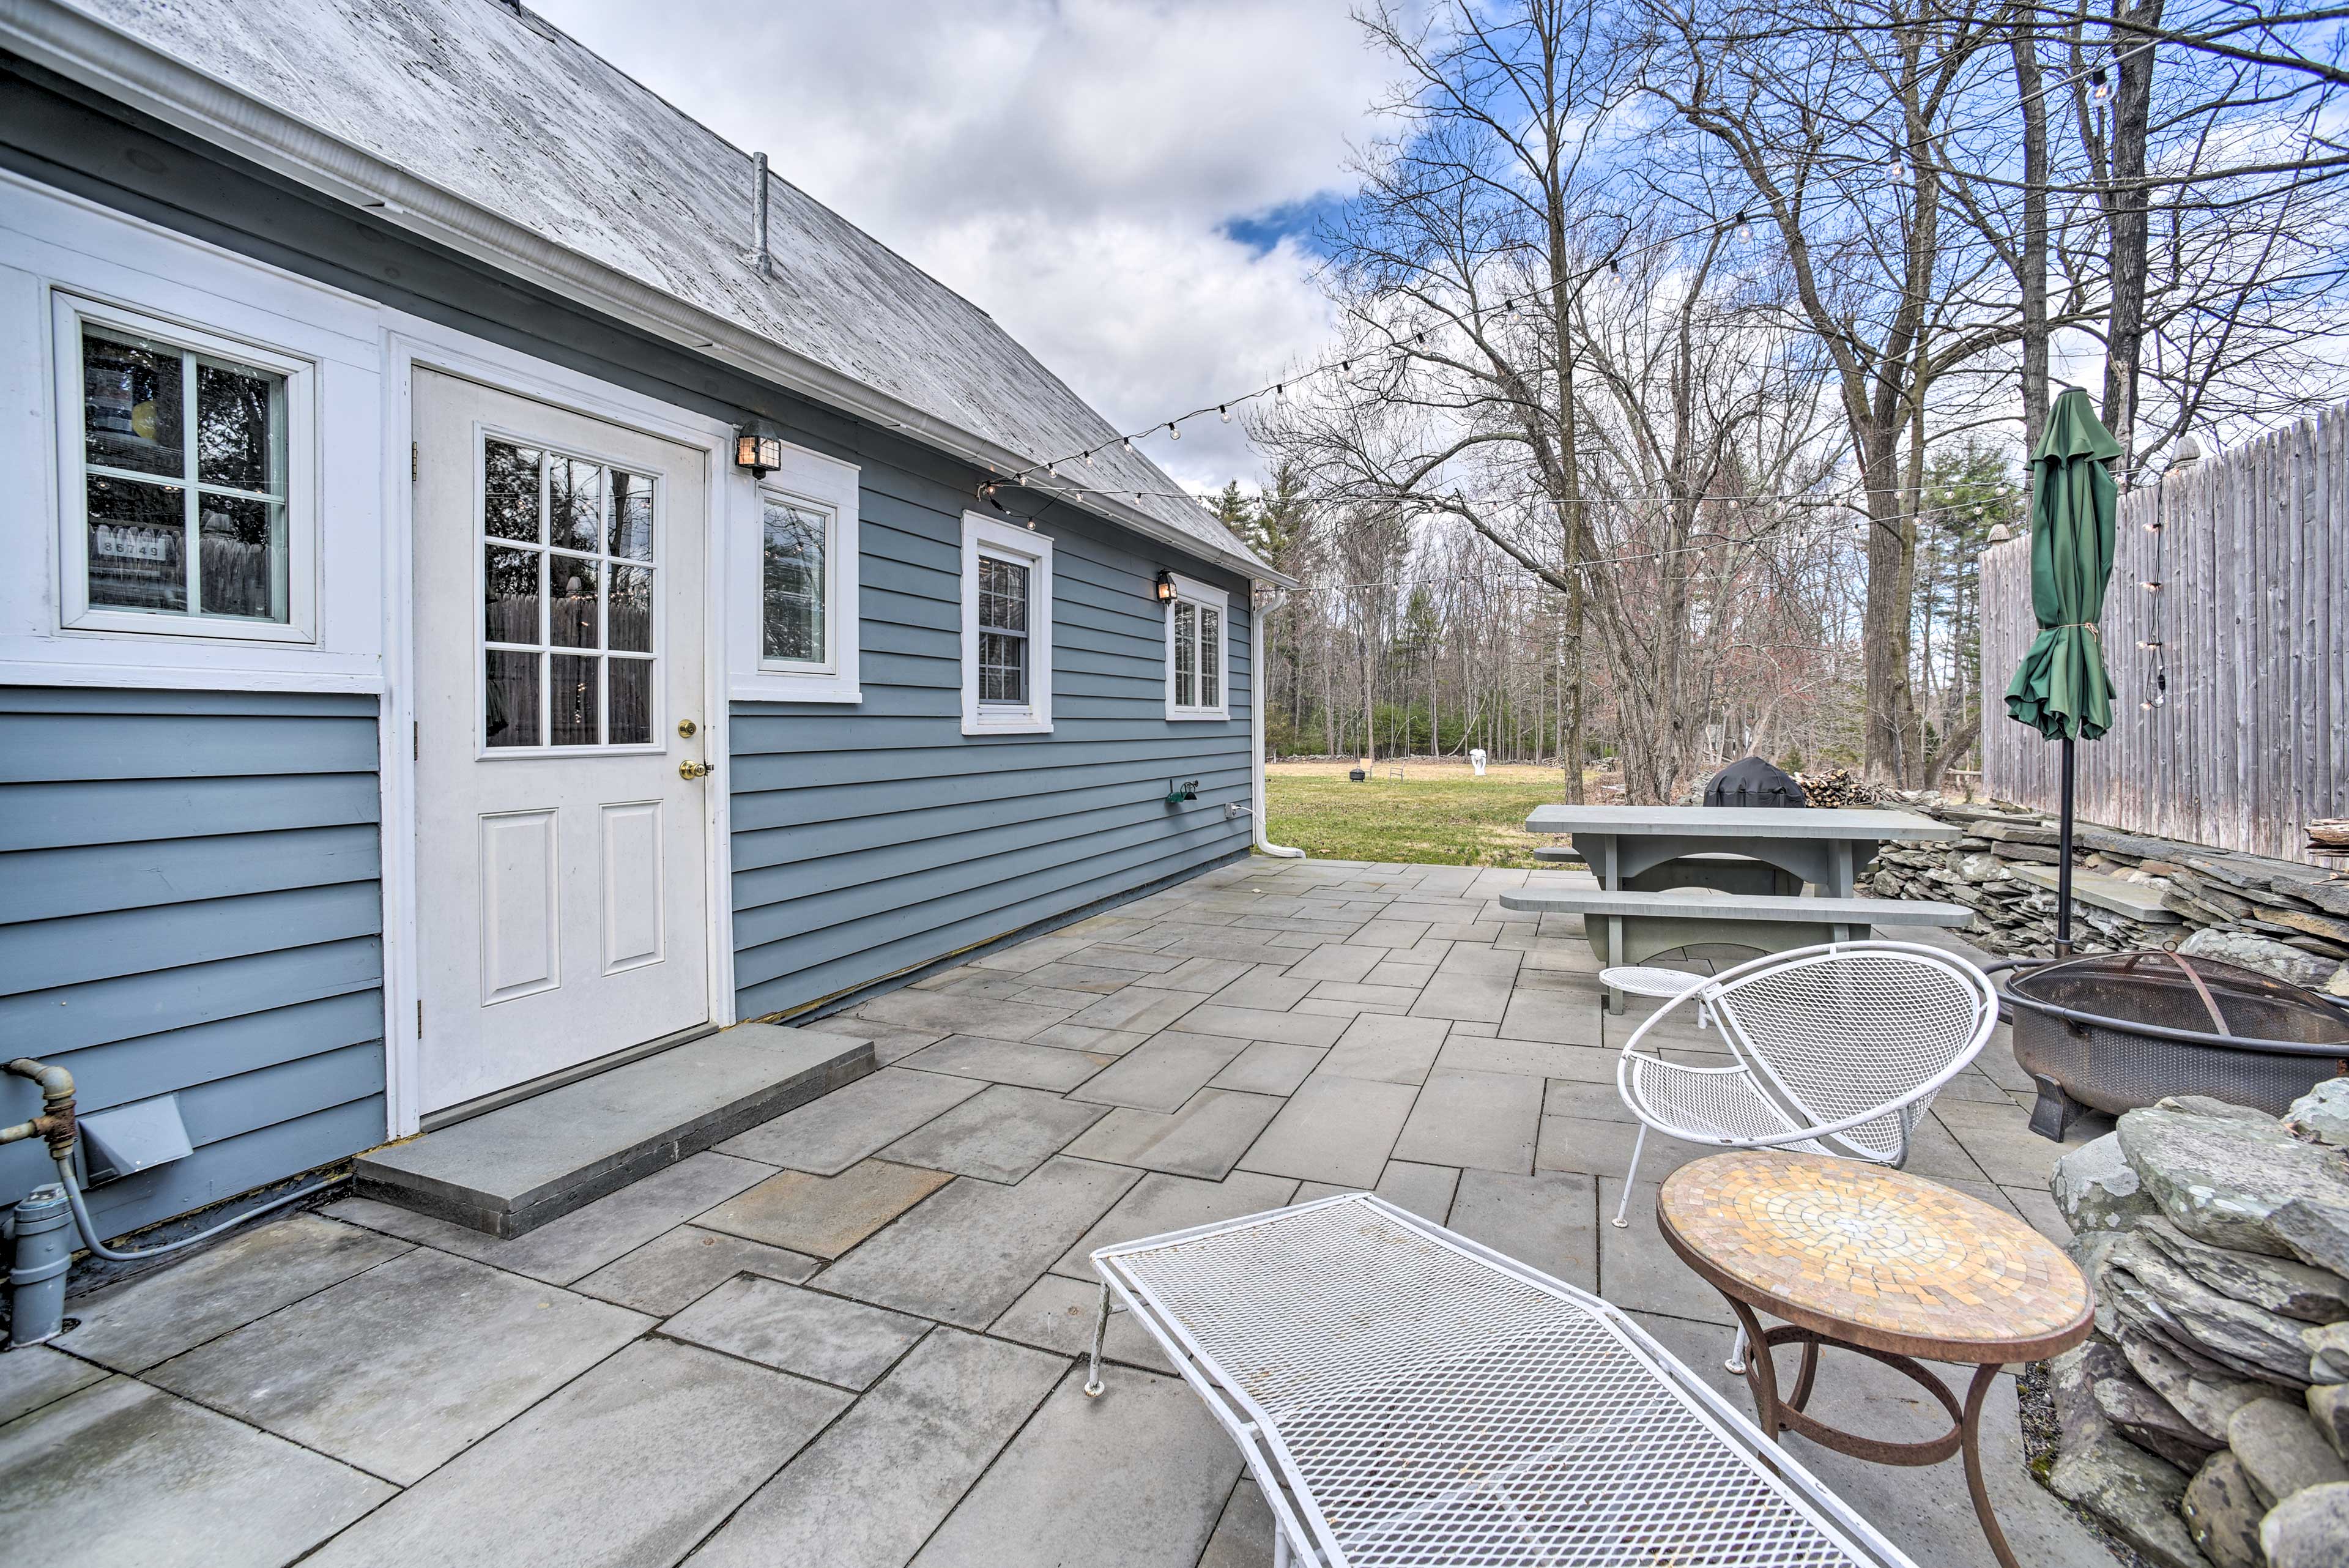 Woodstock Vacation Rental | 2BR | 1BA | 1,000 Sq Ft | Step-Free Entry